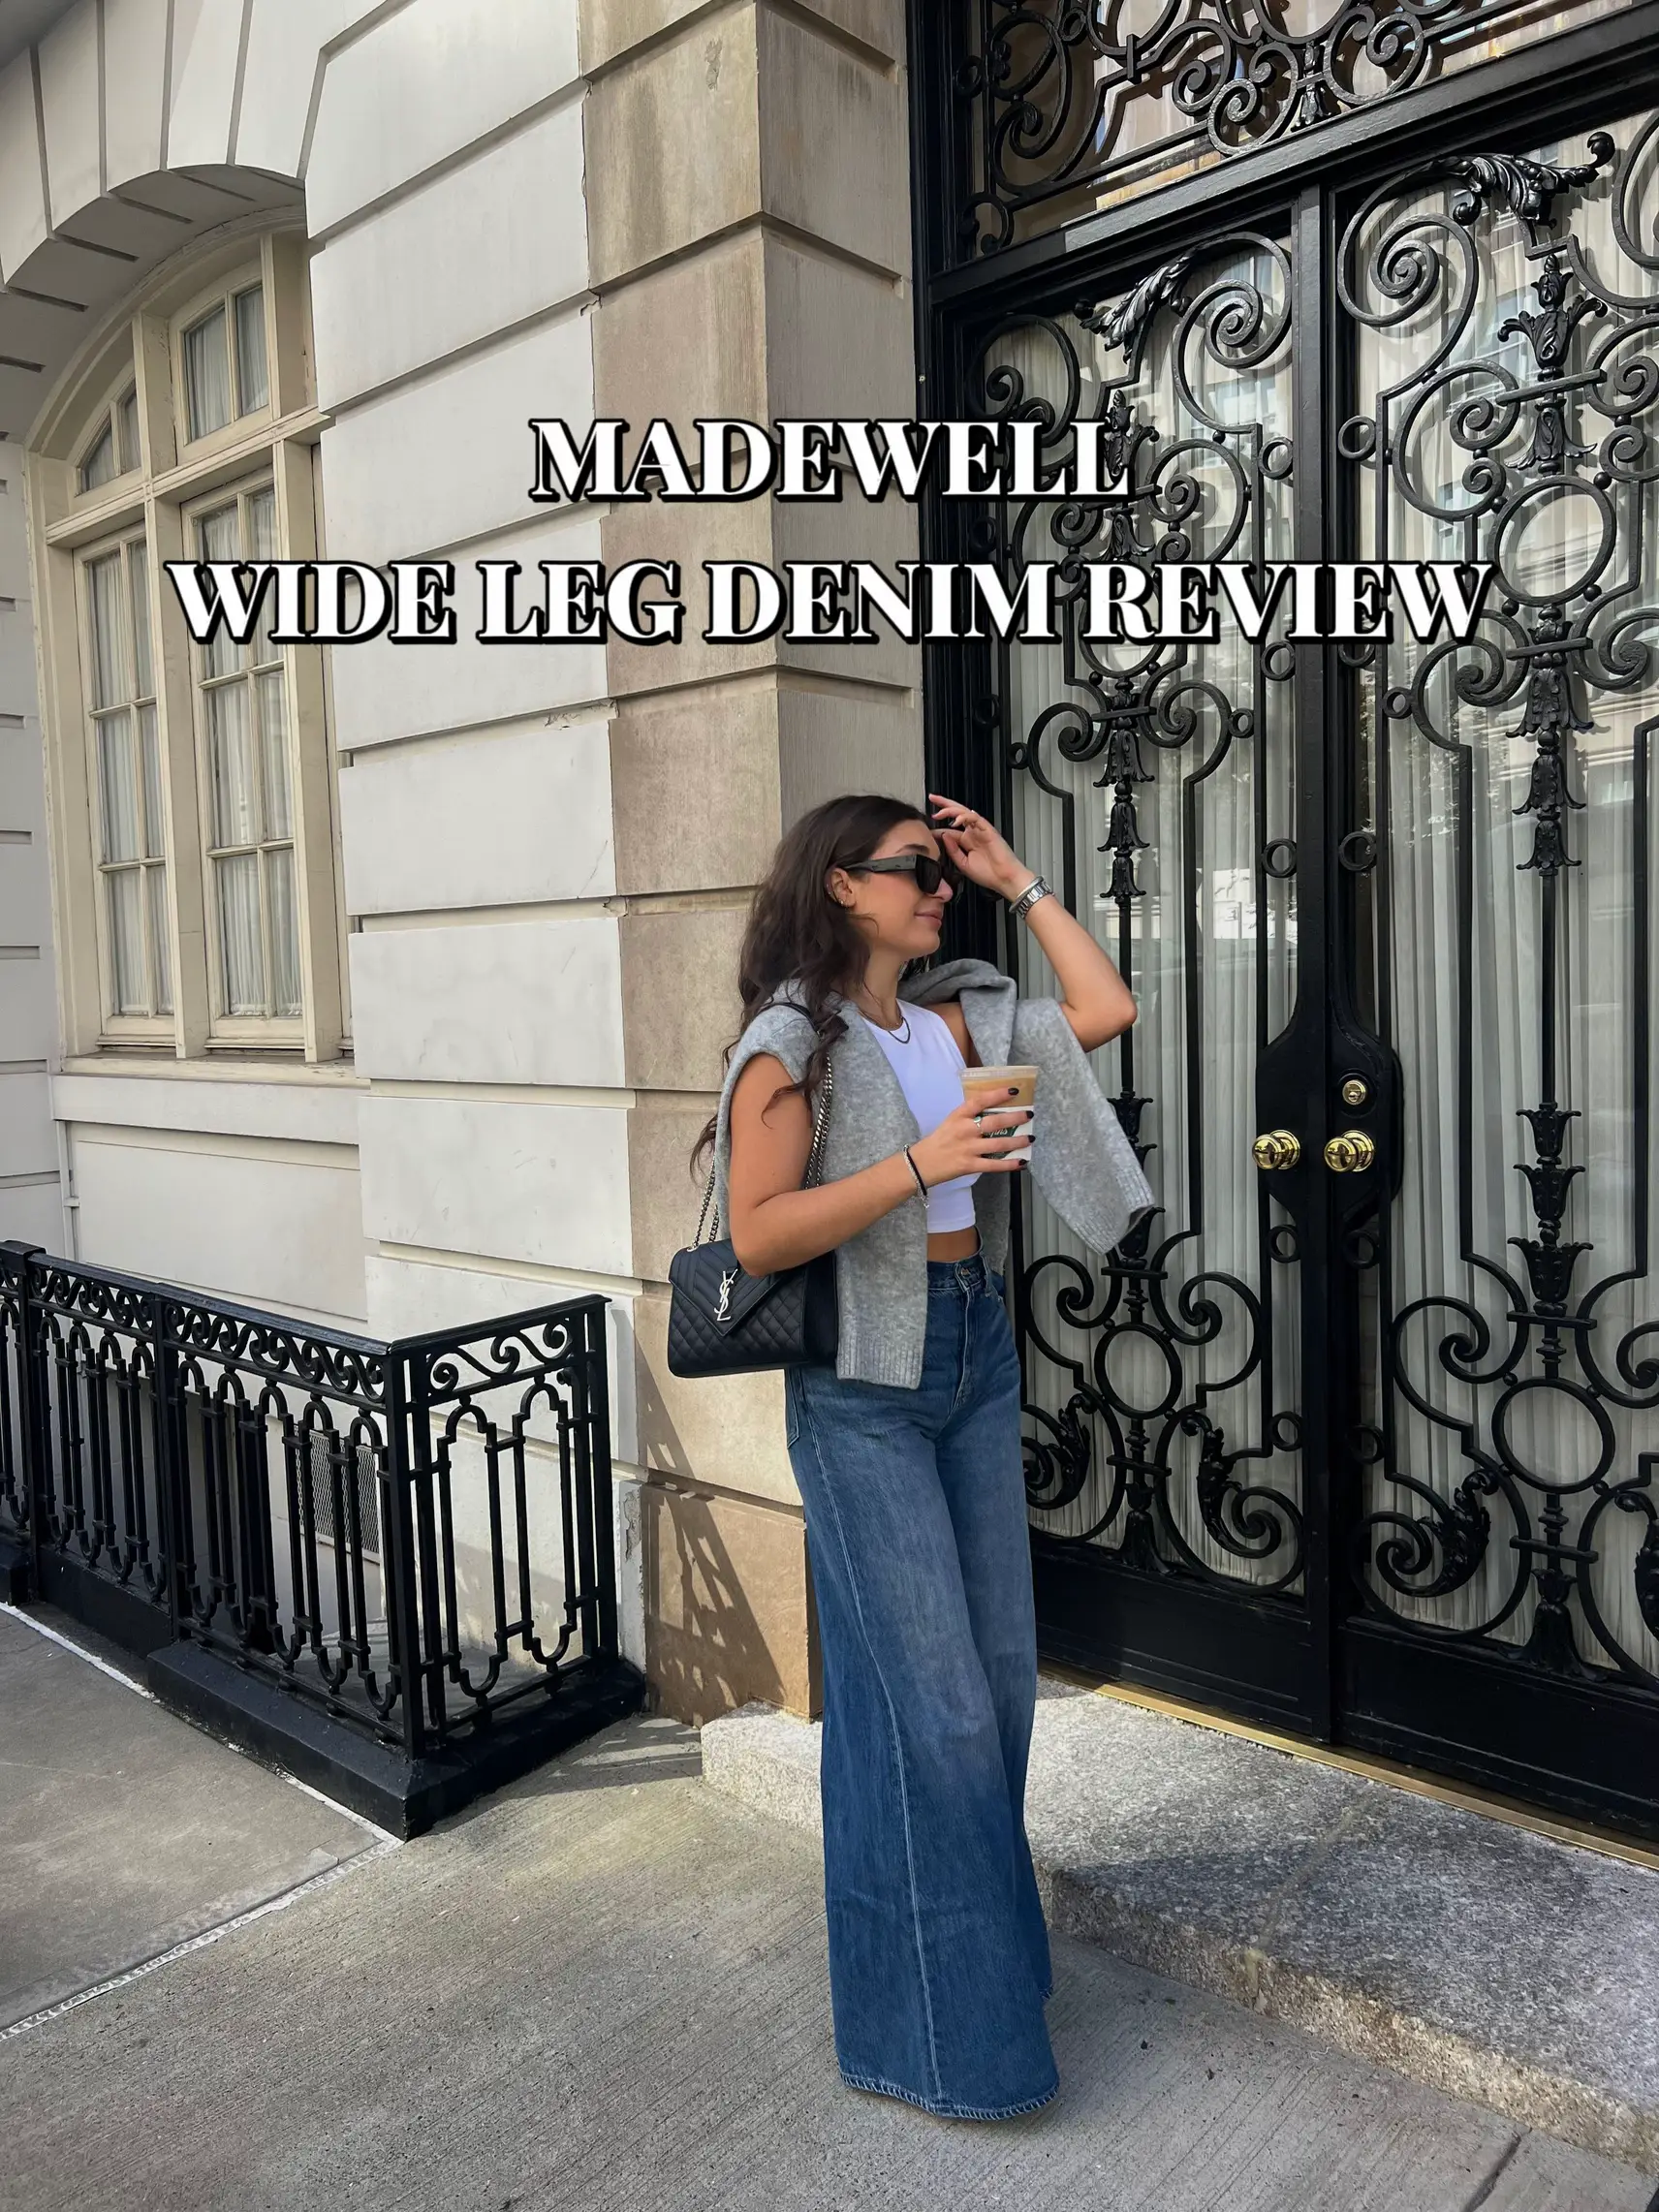 MADEWELL WIDE LEG DENIM REVIEW, Gallery posted by Sstephkoutss